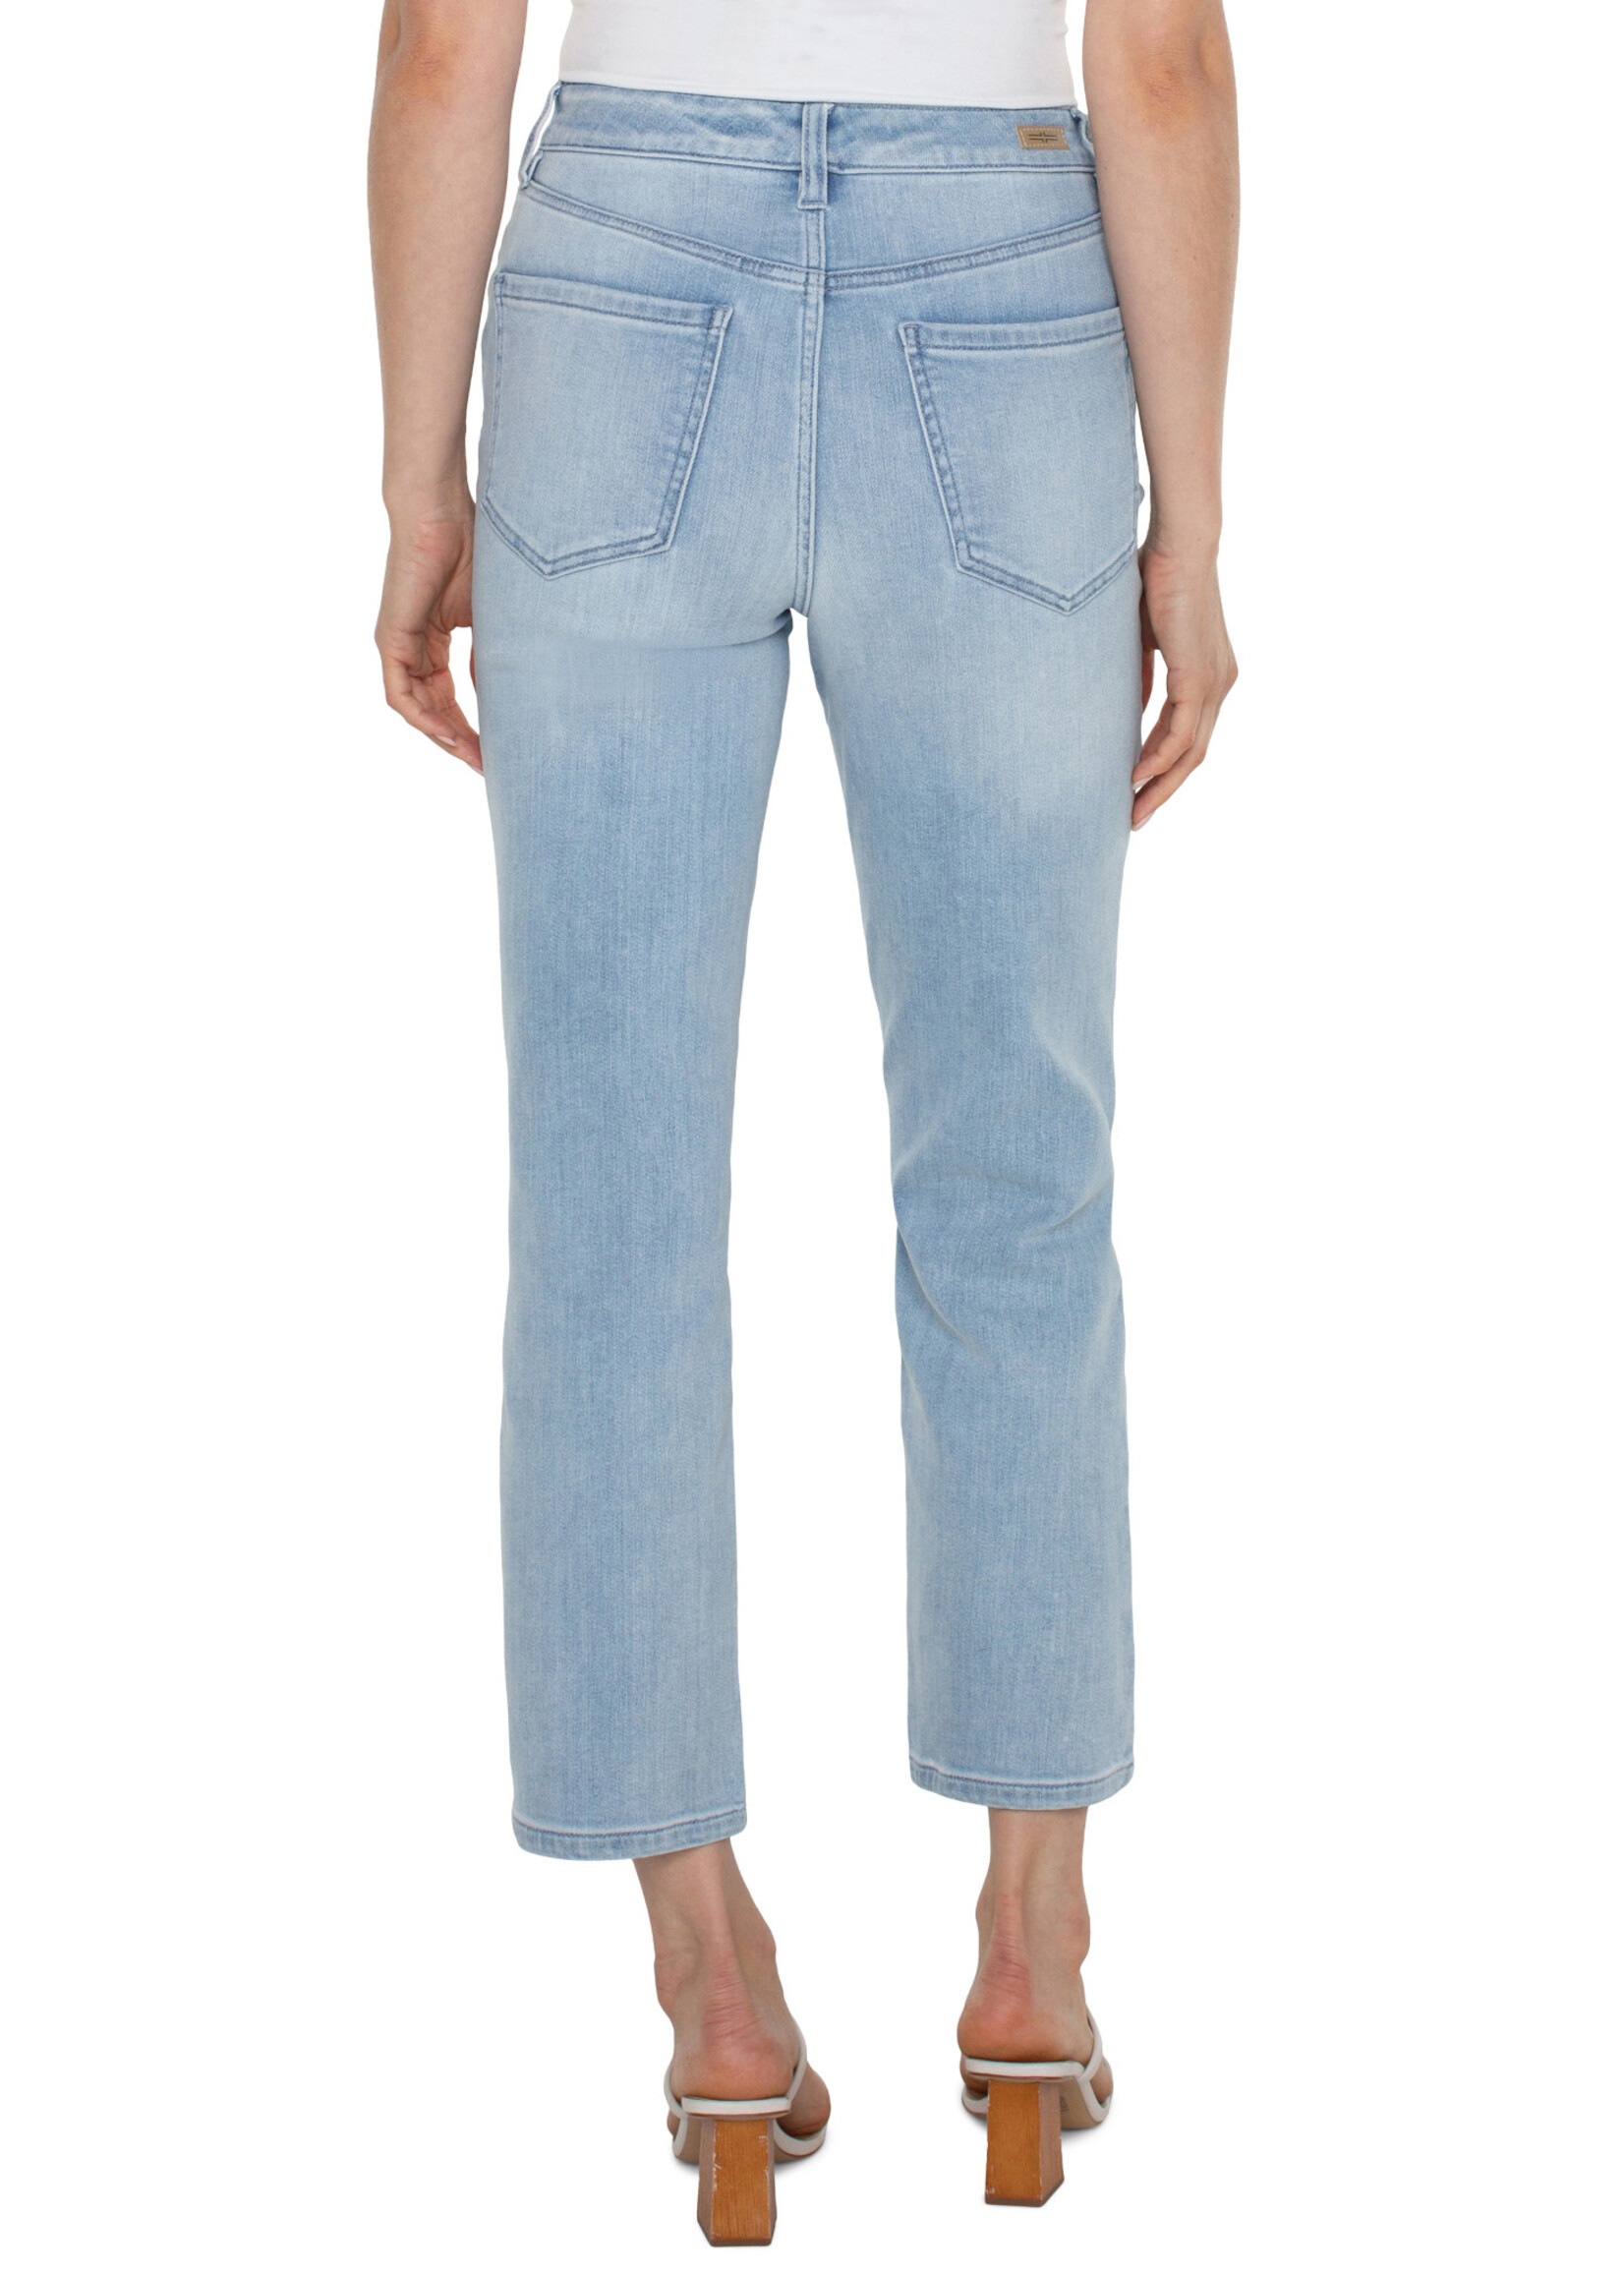 Liverpool LP High Rise Non-skinny Skinny Jeans